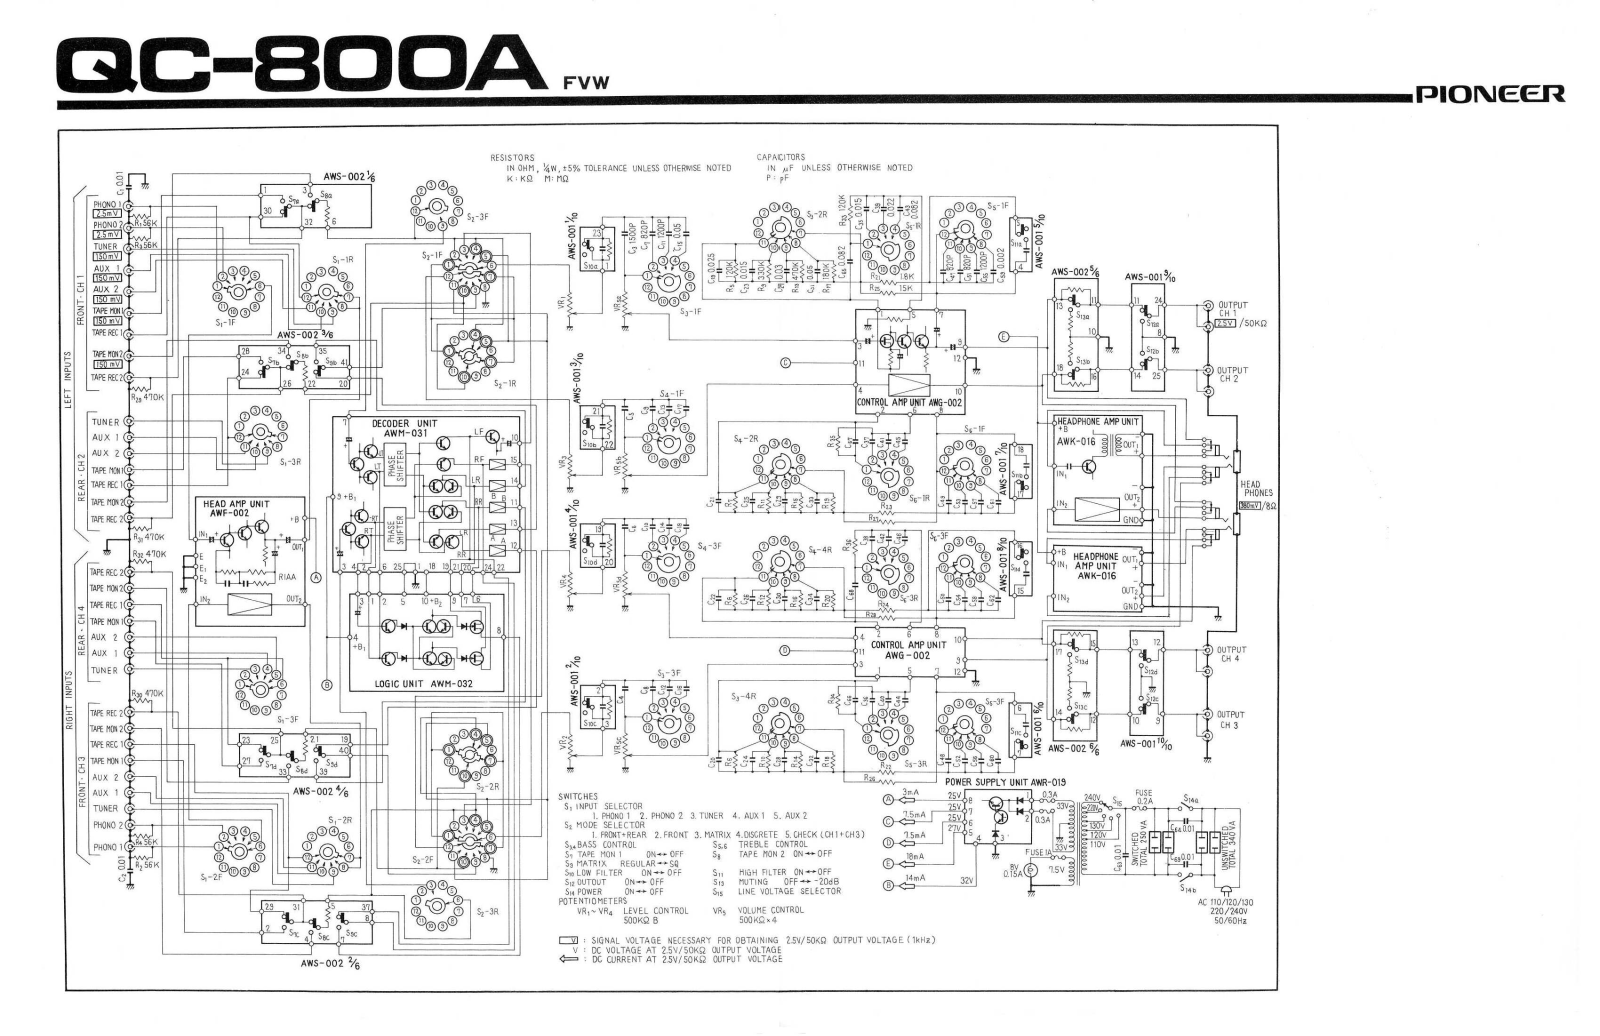 Pioneer QC-800A Schematic